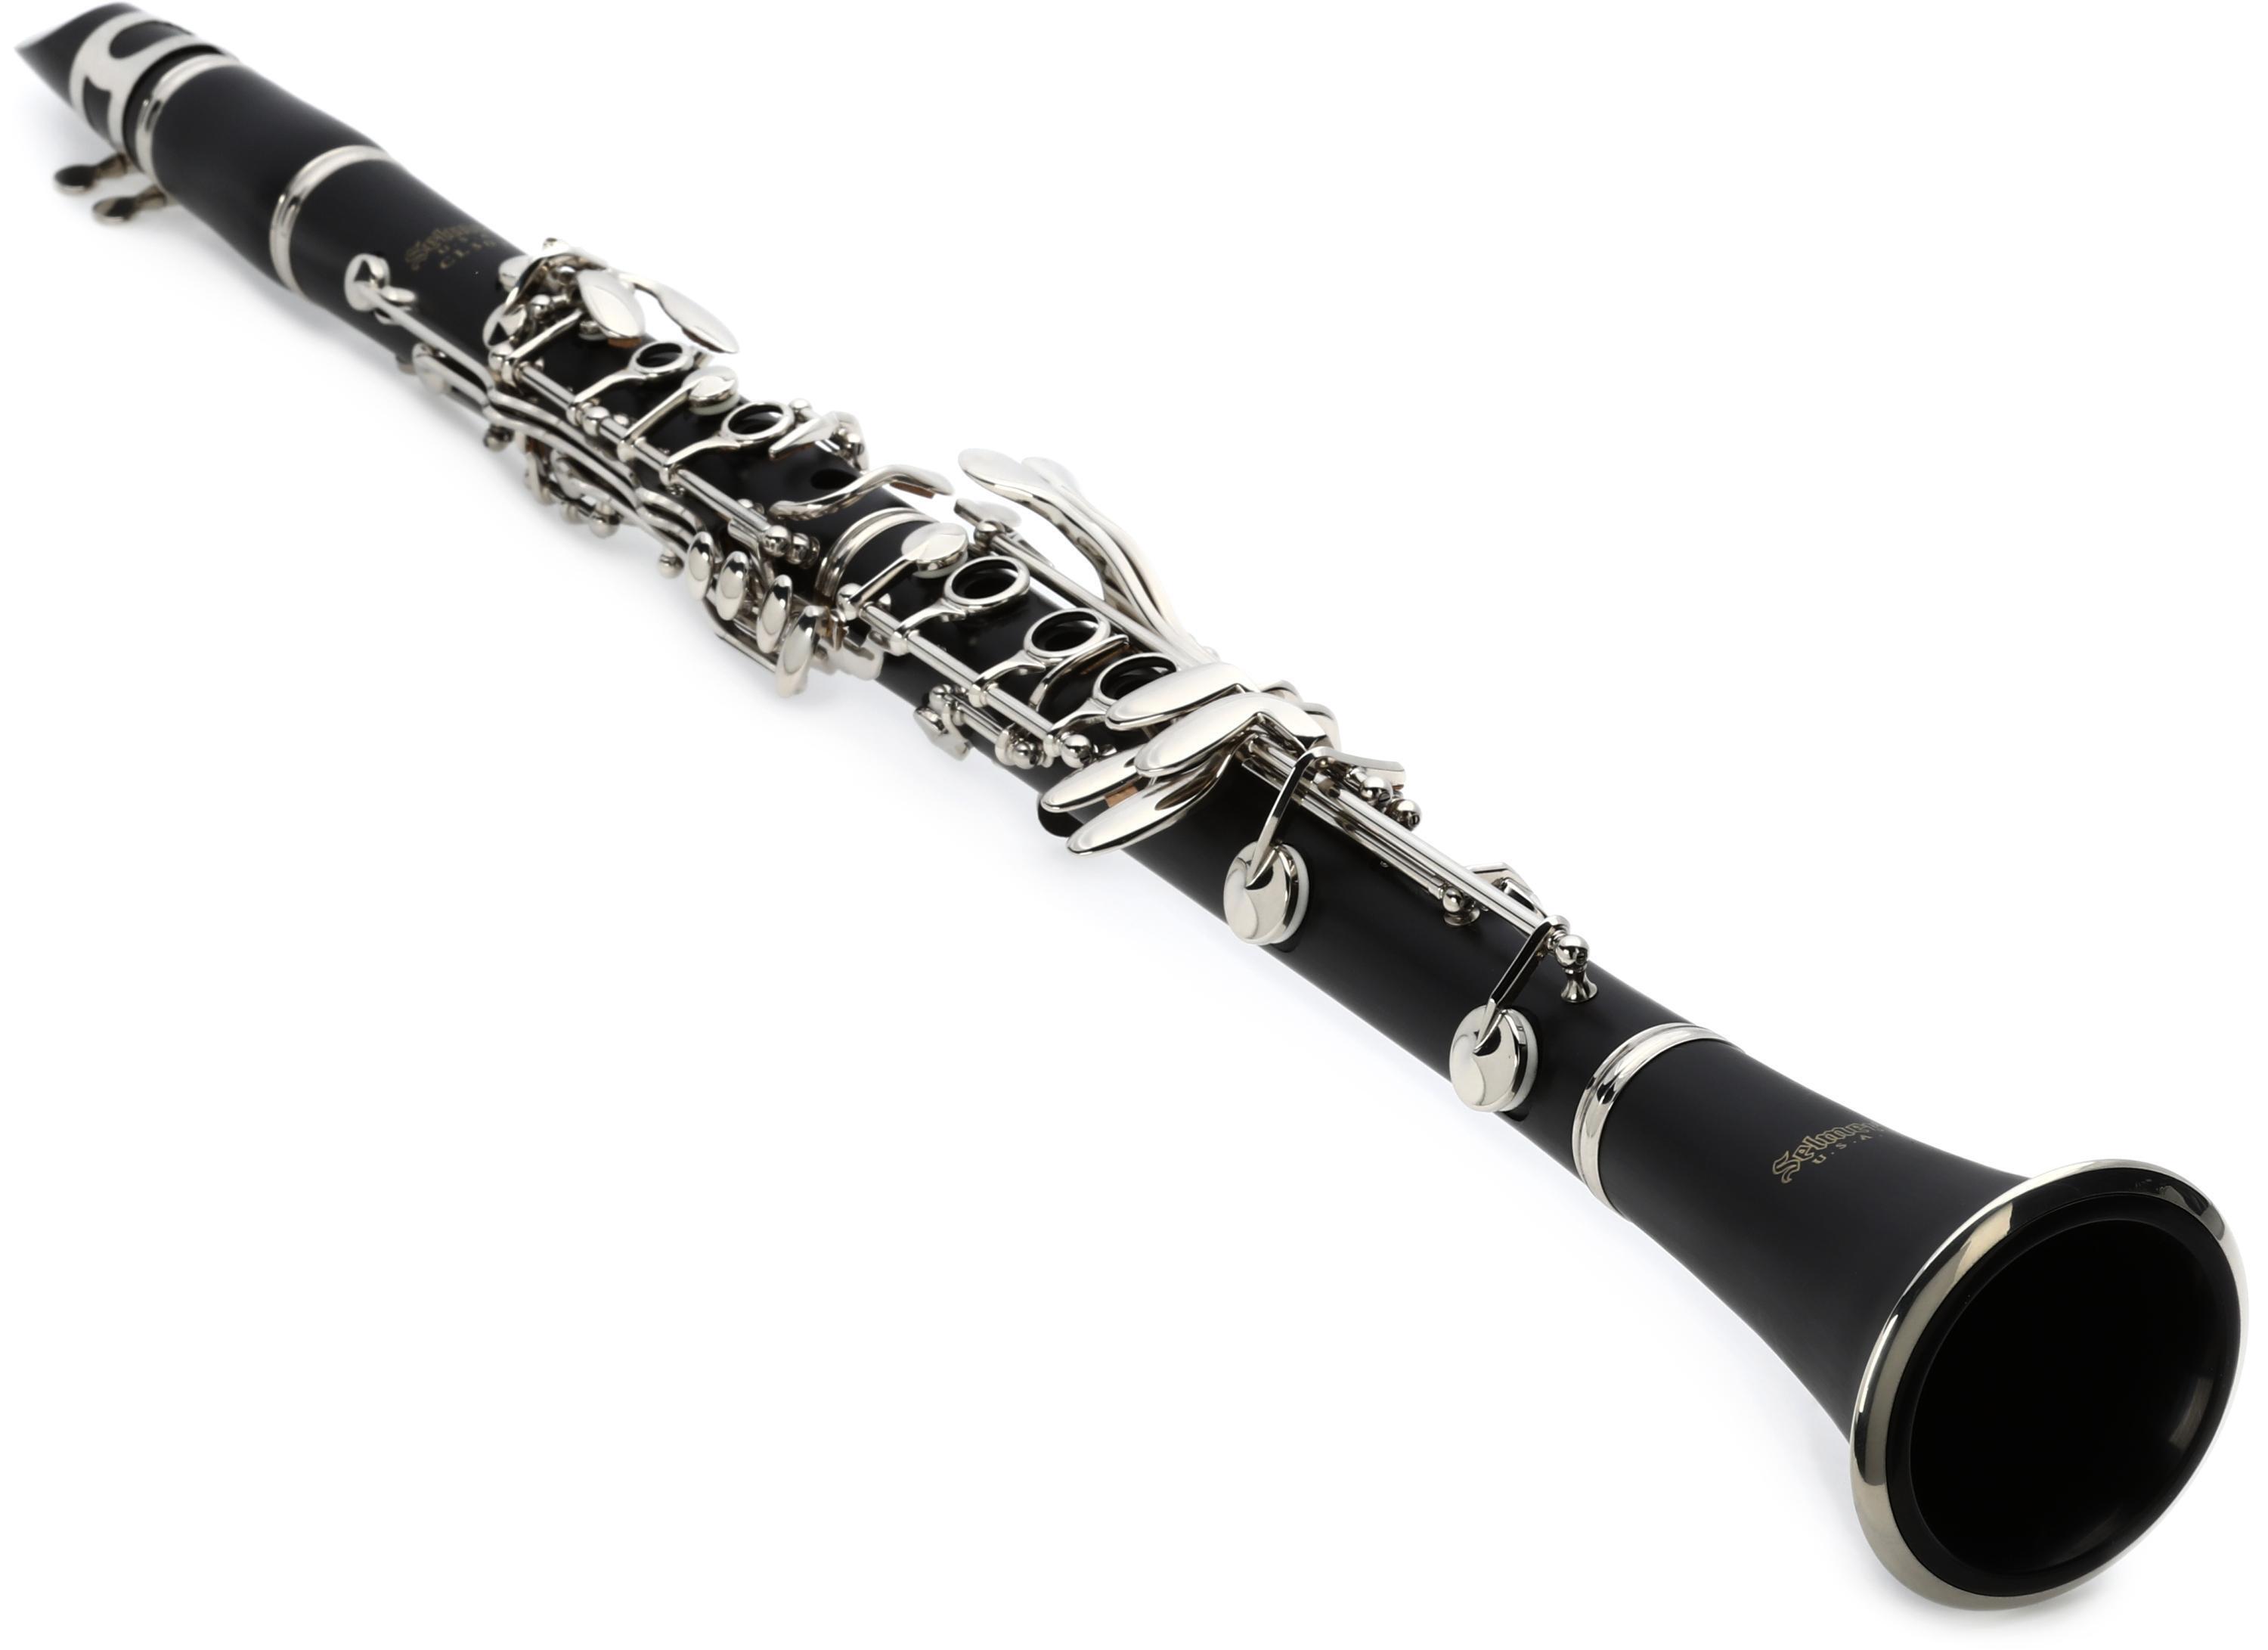 Selmer CL301 Student Clarinet with Nickel-plated Keys